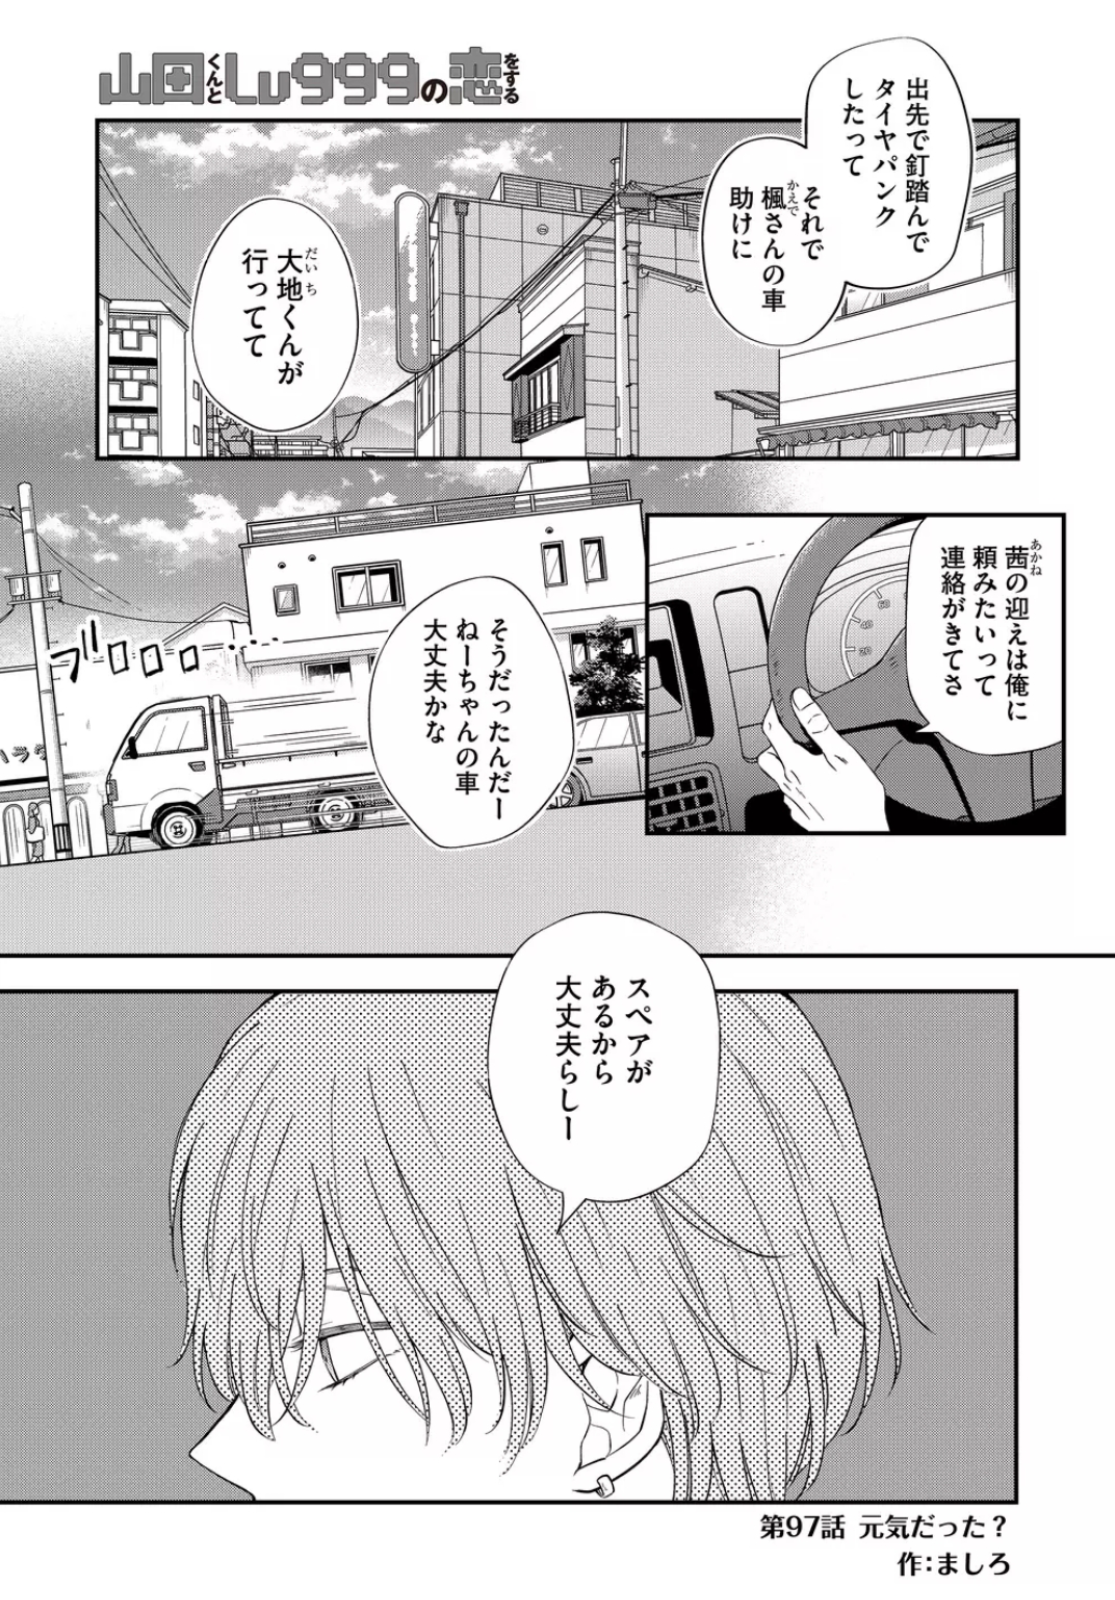 Chapter 97, My Love Story with Yamada-kun at Lv999